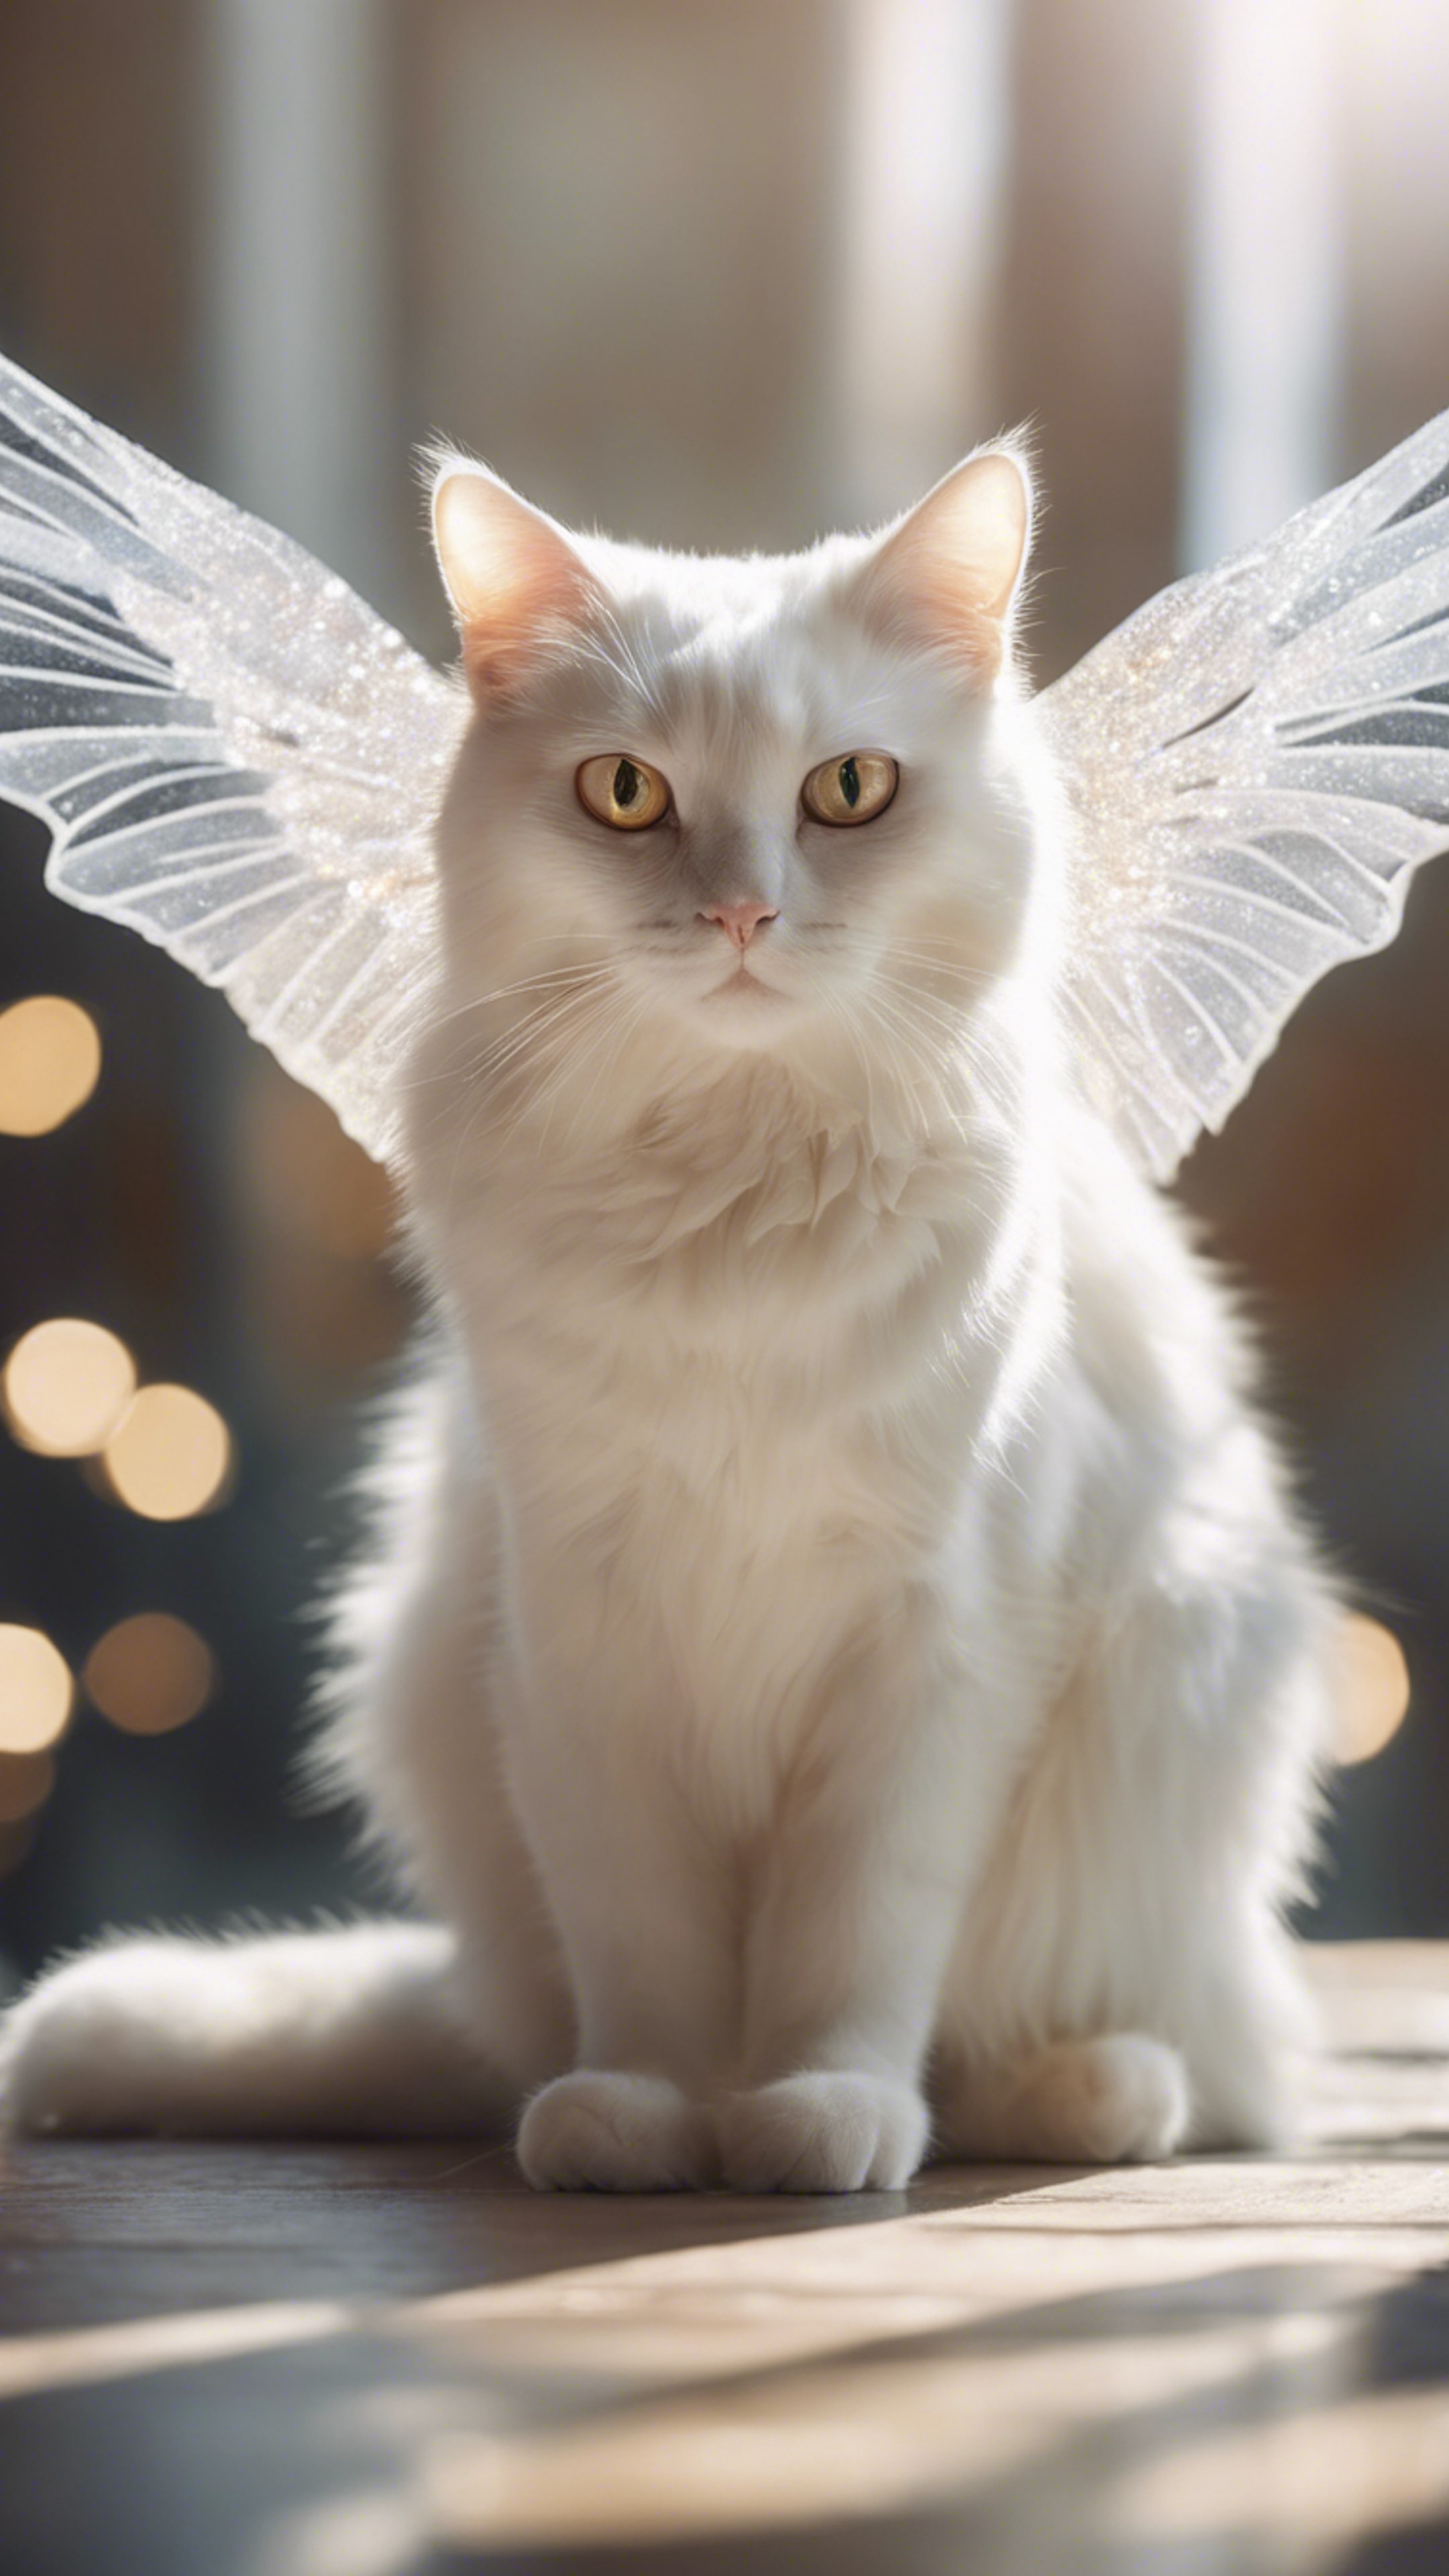 An angelic white cat with shimmering wings of radiant light. 墙纸[3c11d42234a34aa69153]